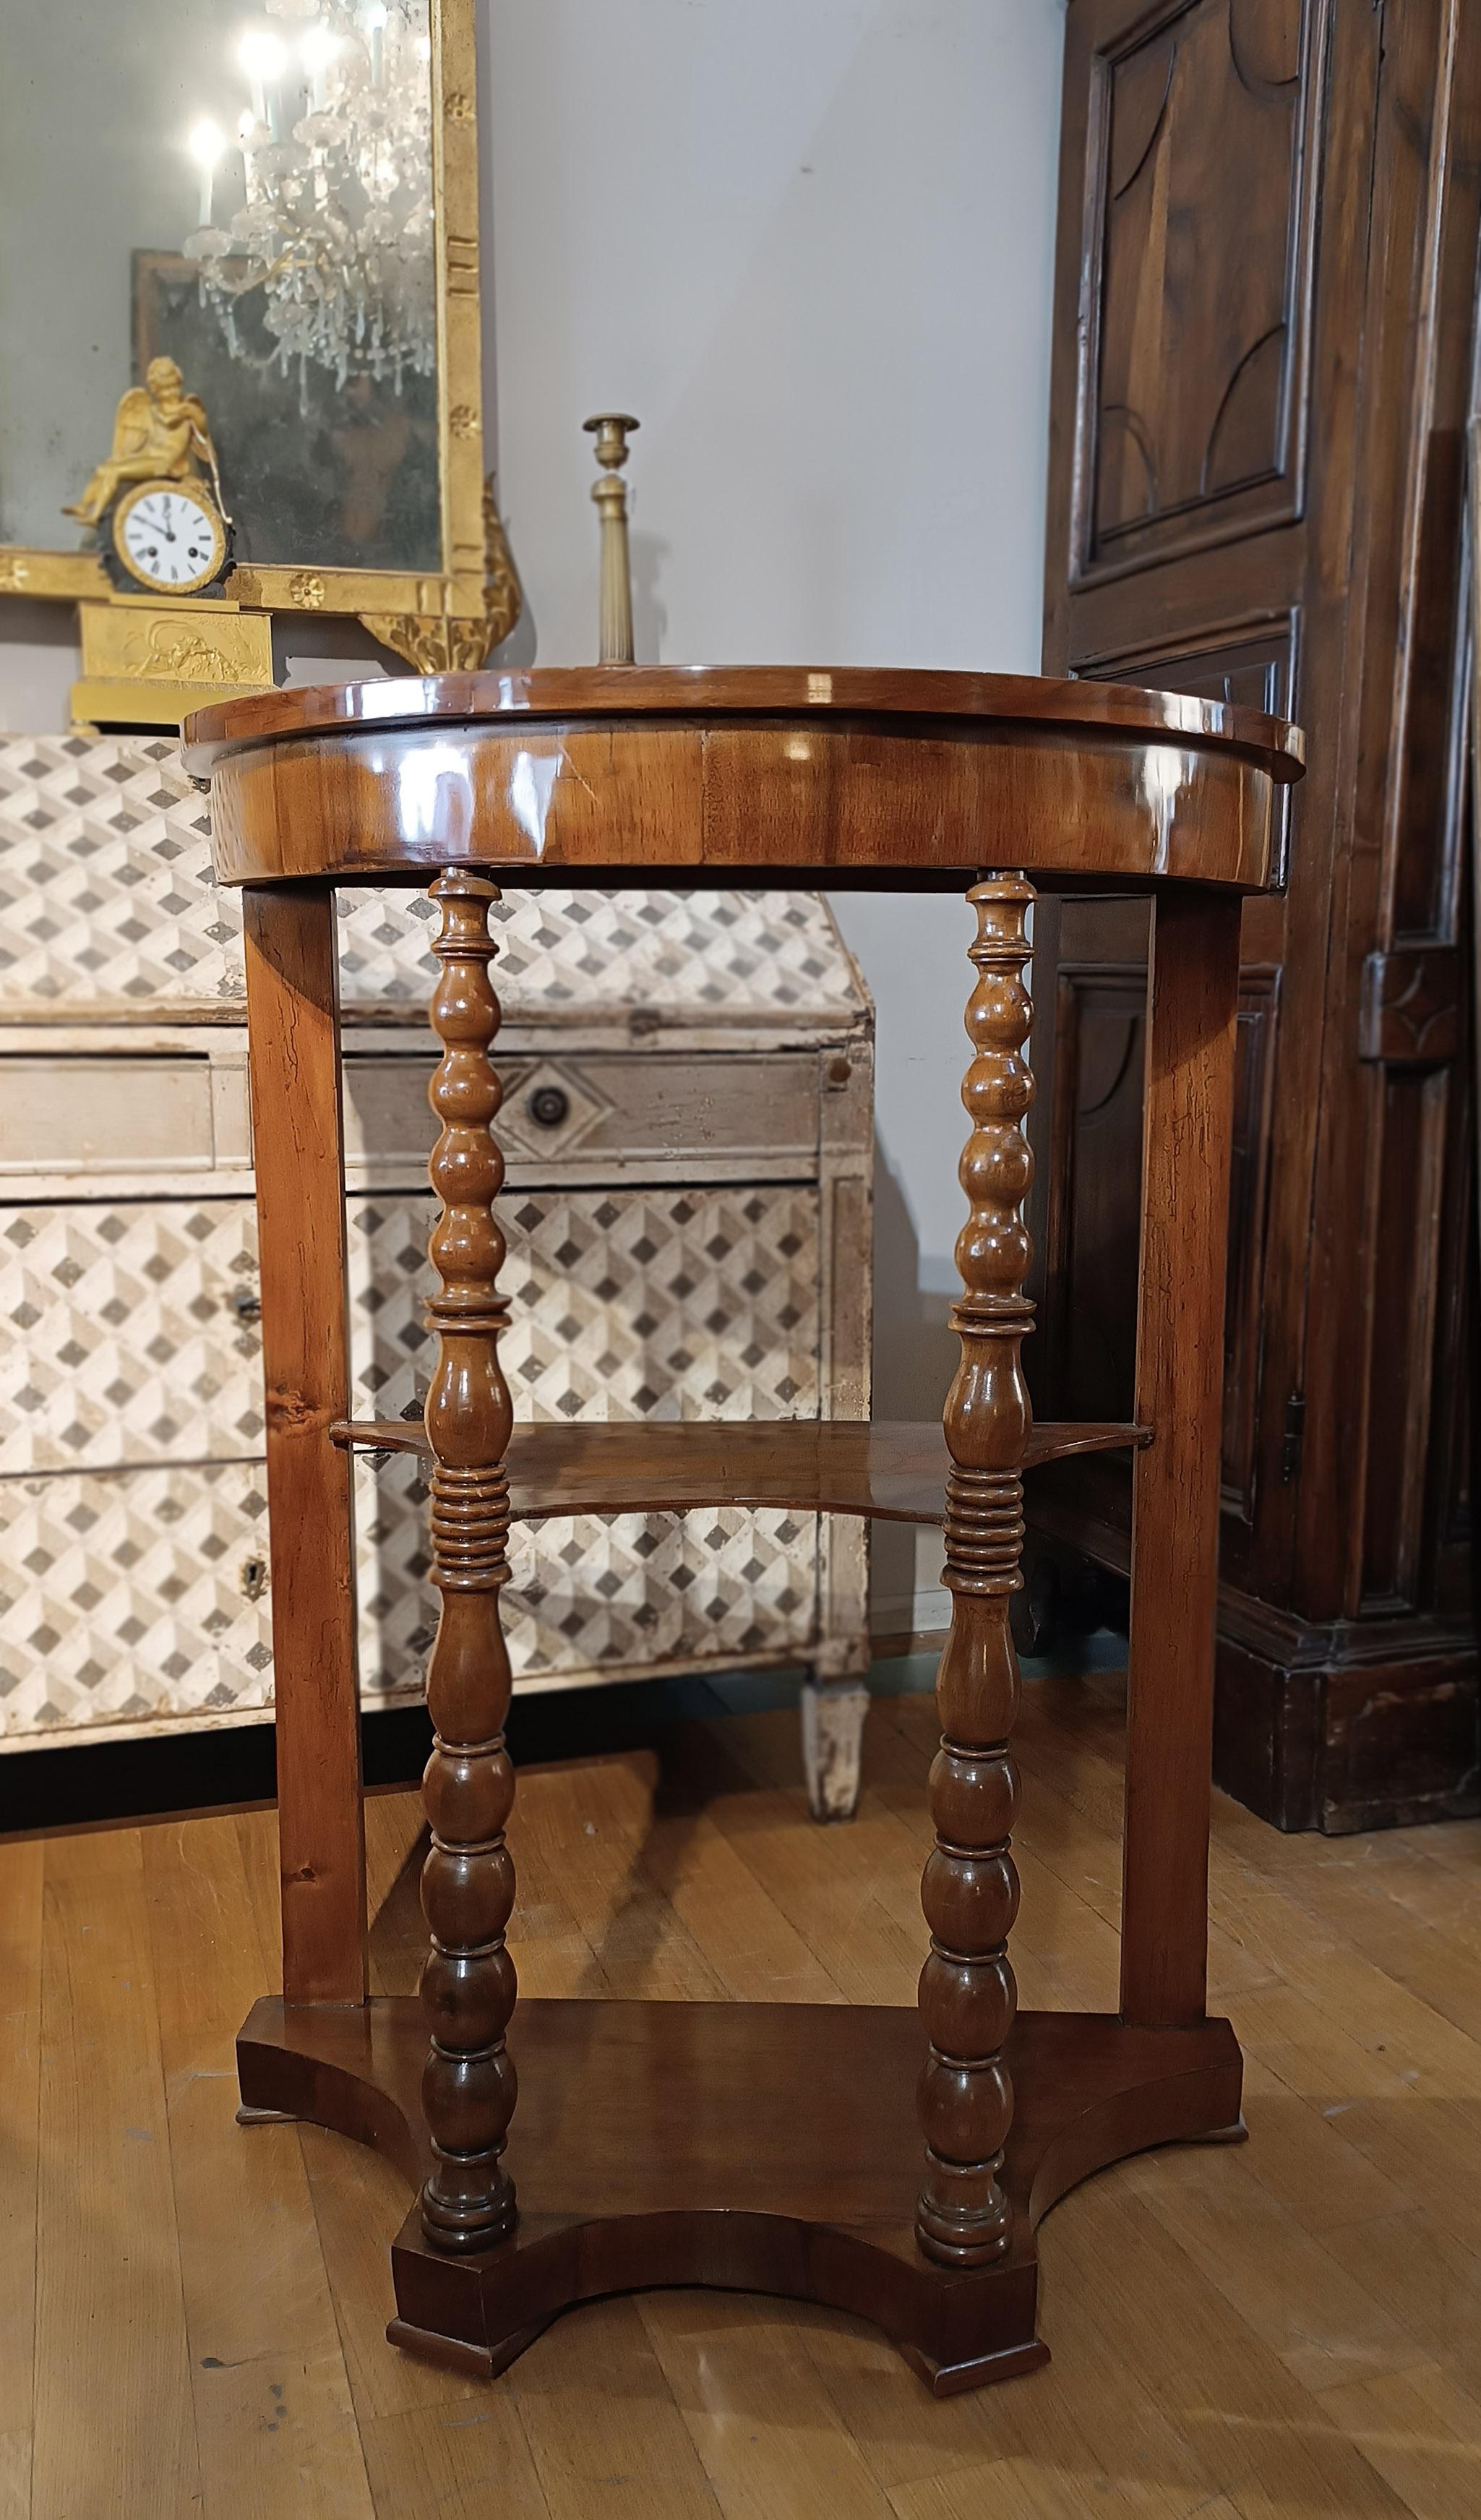 Elegant and refined étagère made of solid walnut wood and walnut veneer. The cabinet has a half-moon shape with three shelves, ideal for storing various types of objects. The decoration is finely finished and turned for the front shoulders, giving